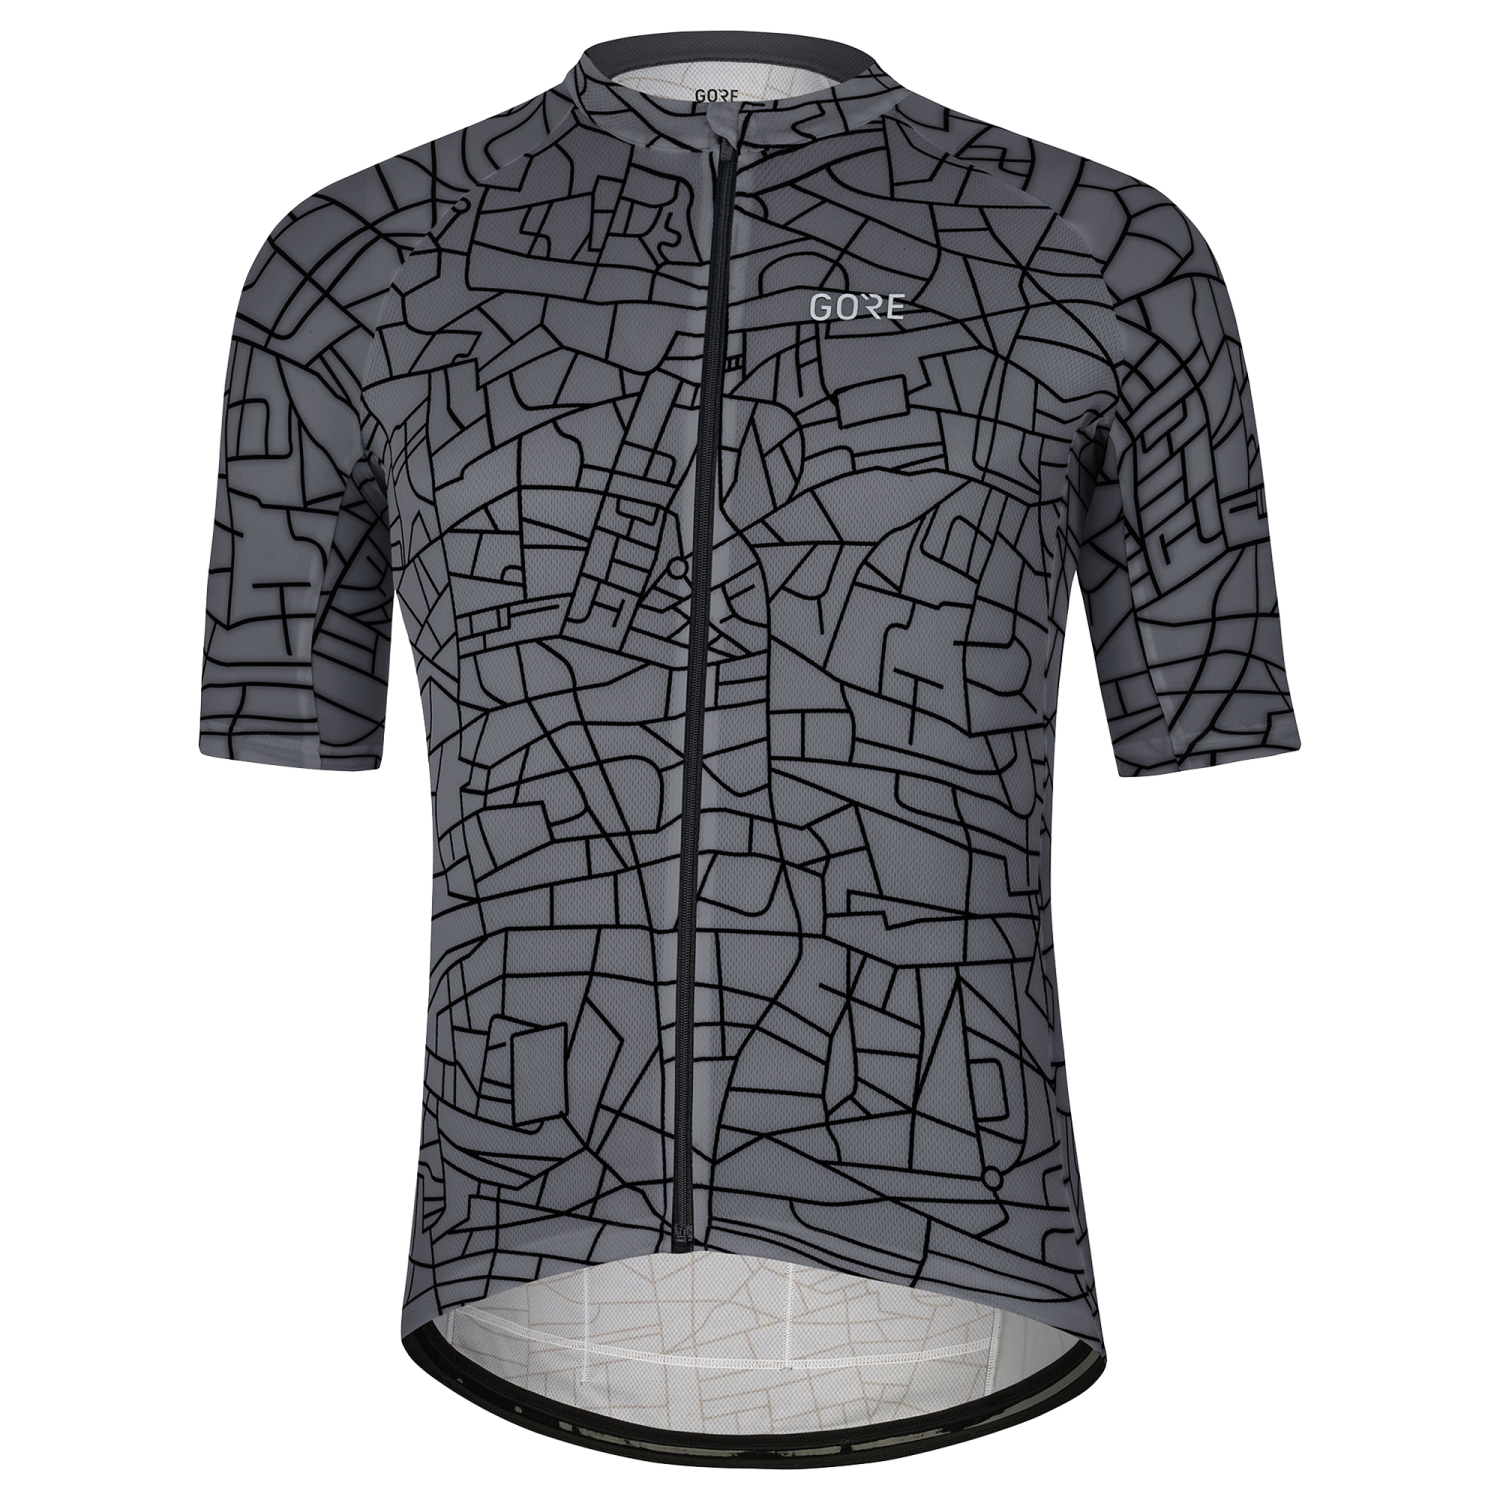 GOREWEAR Gotham Cycling Jersey Men's in Graystone/Black | Large | Form fit